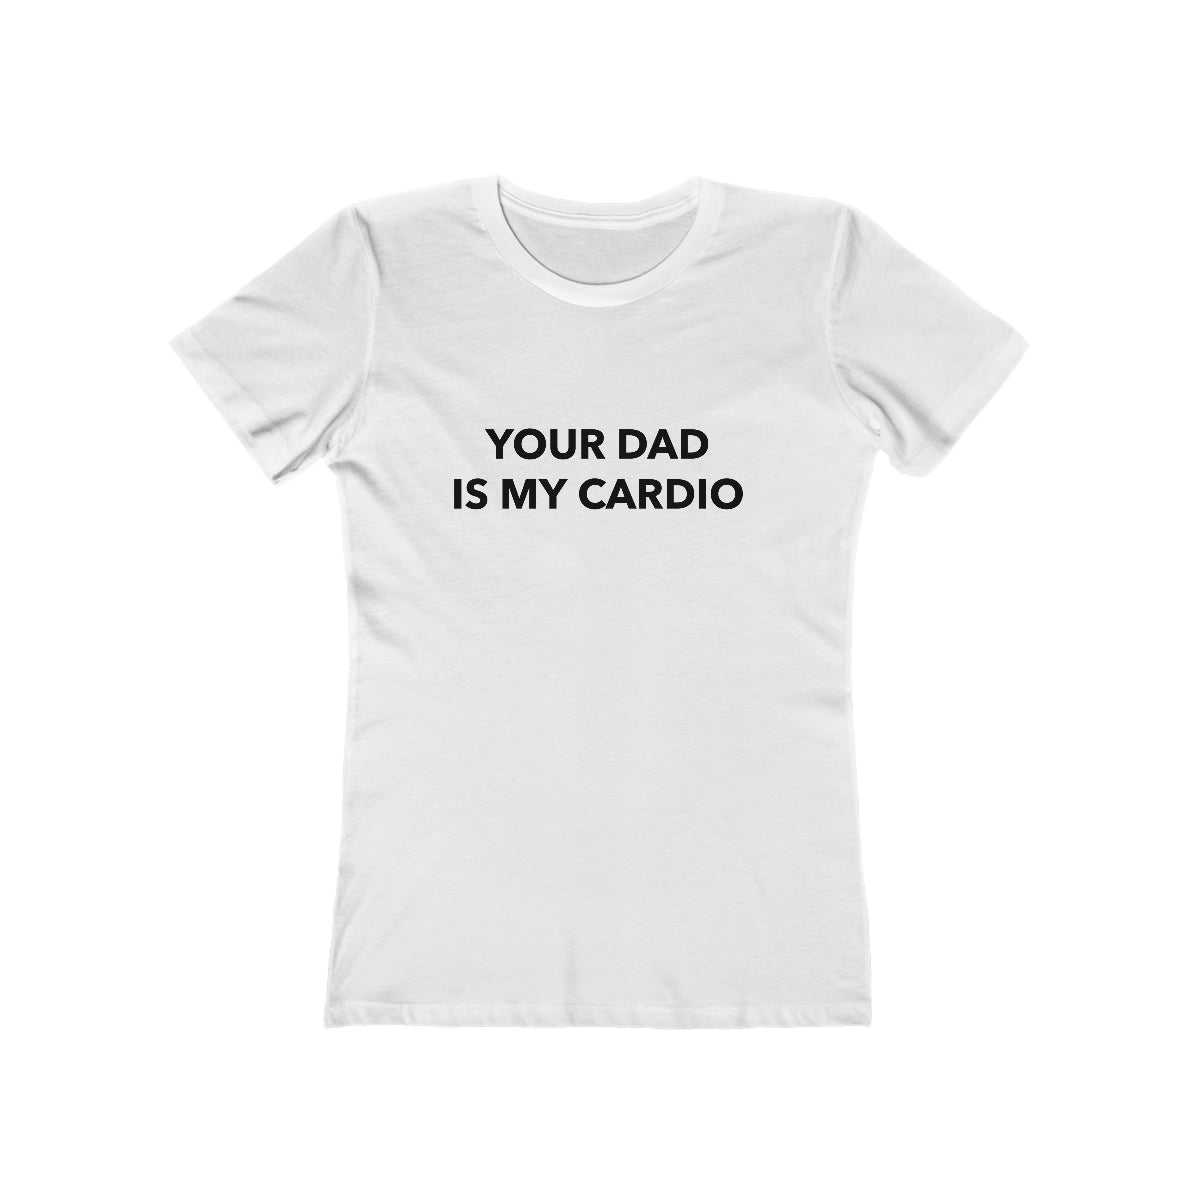 Your Dad Is My Cardio - Women's T-shirt